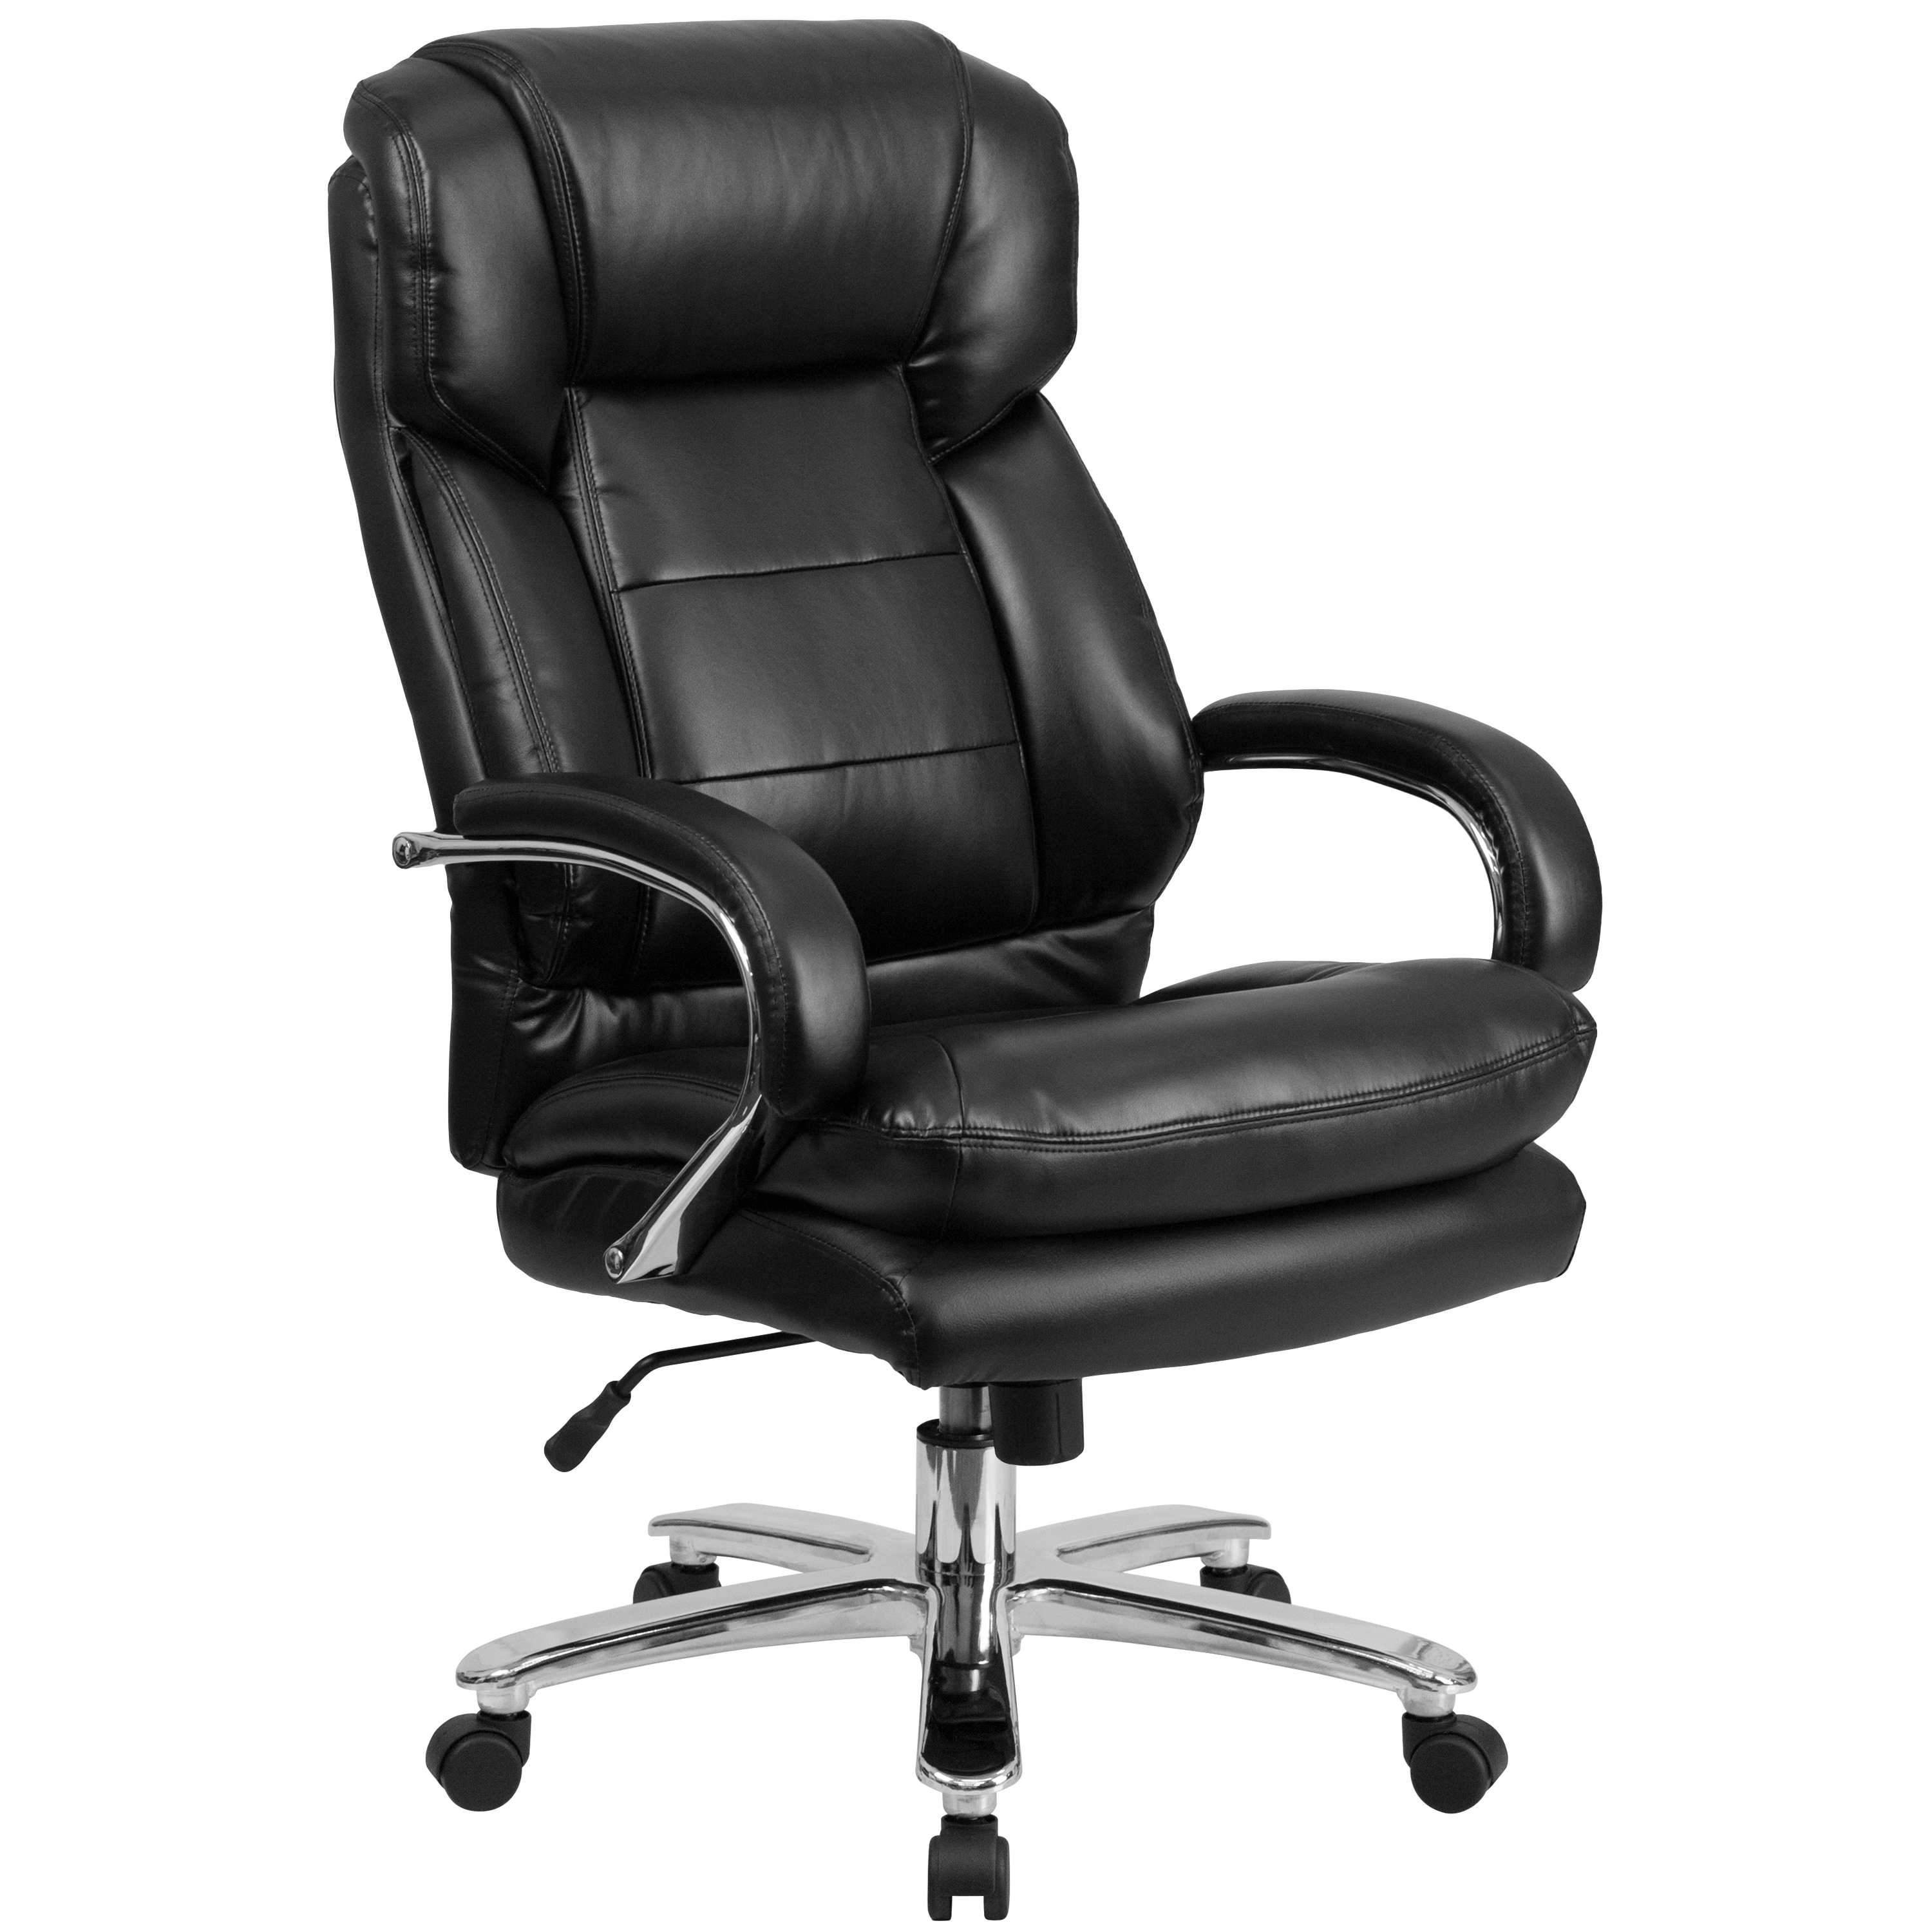 Swivel Desk Chair In The Office Chairs, Leather Contemporary Chair